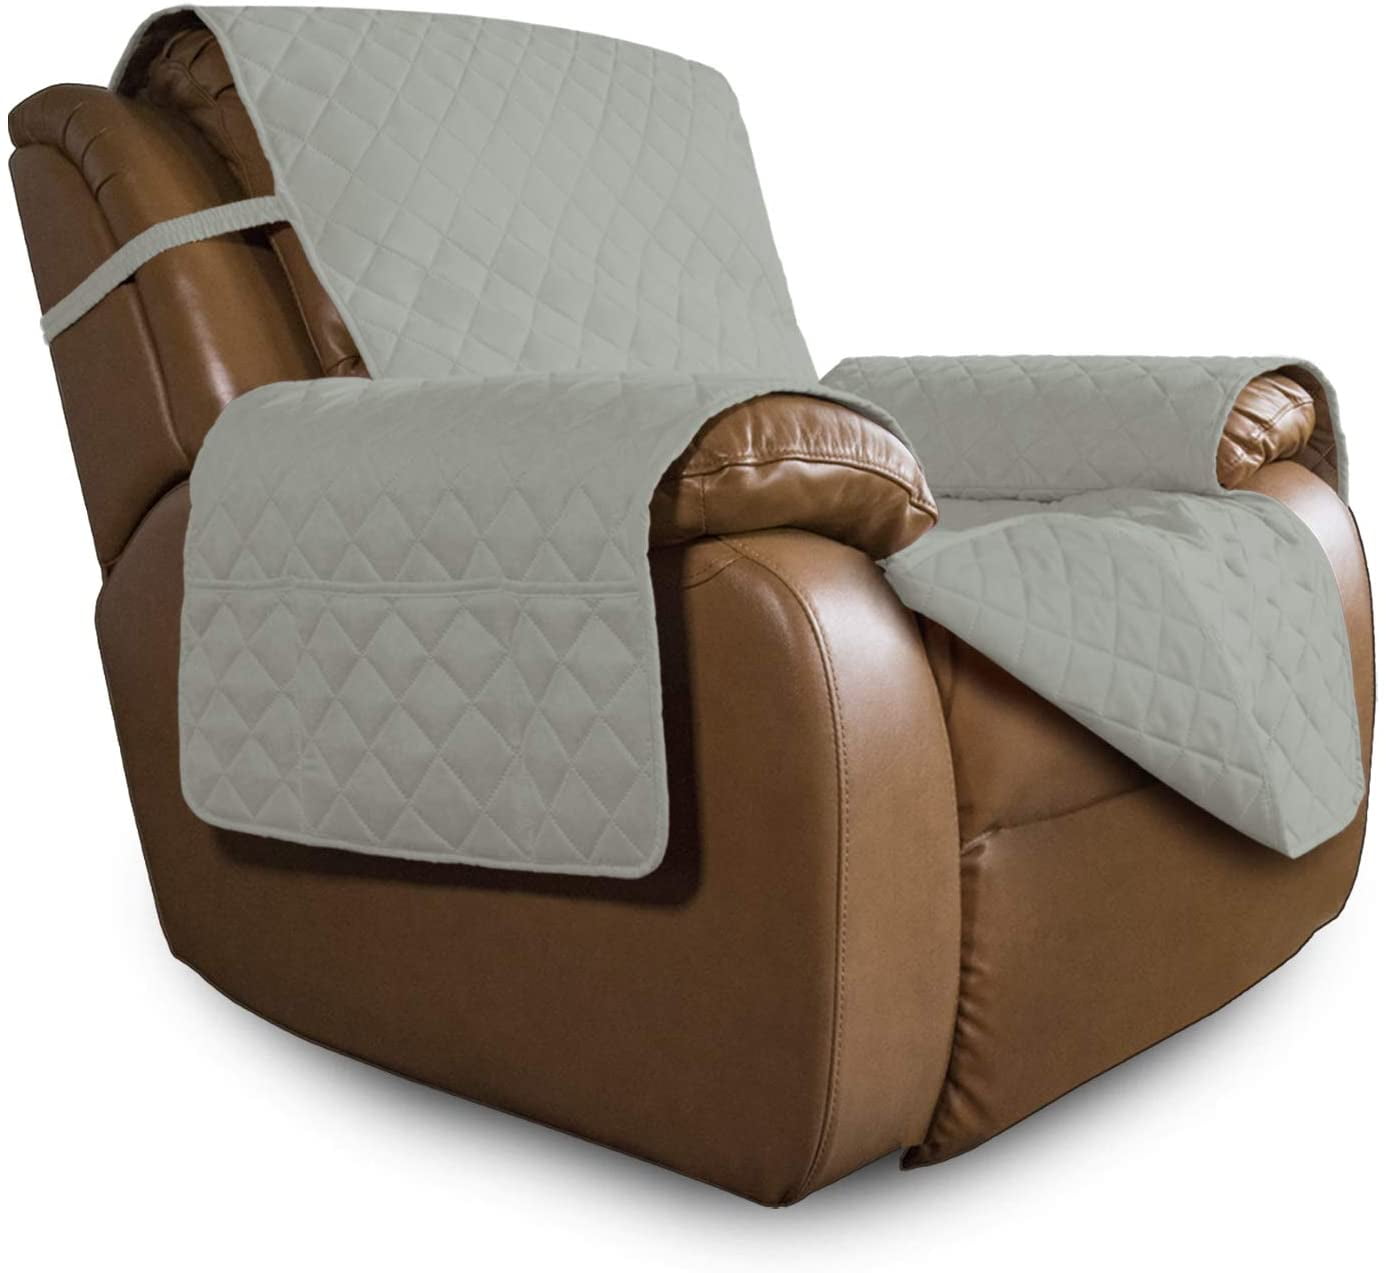 Details about   Removable Arm Chair Covers Protector Armchair Sofa Covers Armrest Stretch Couch 